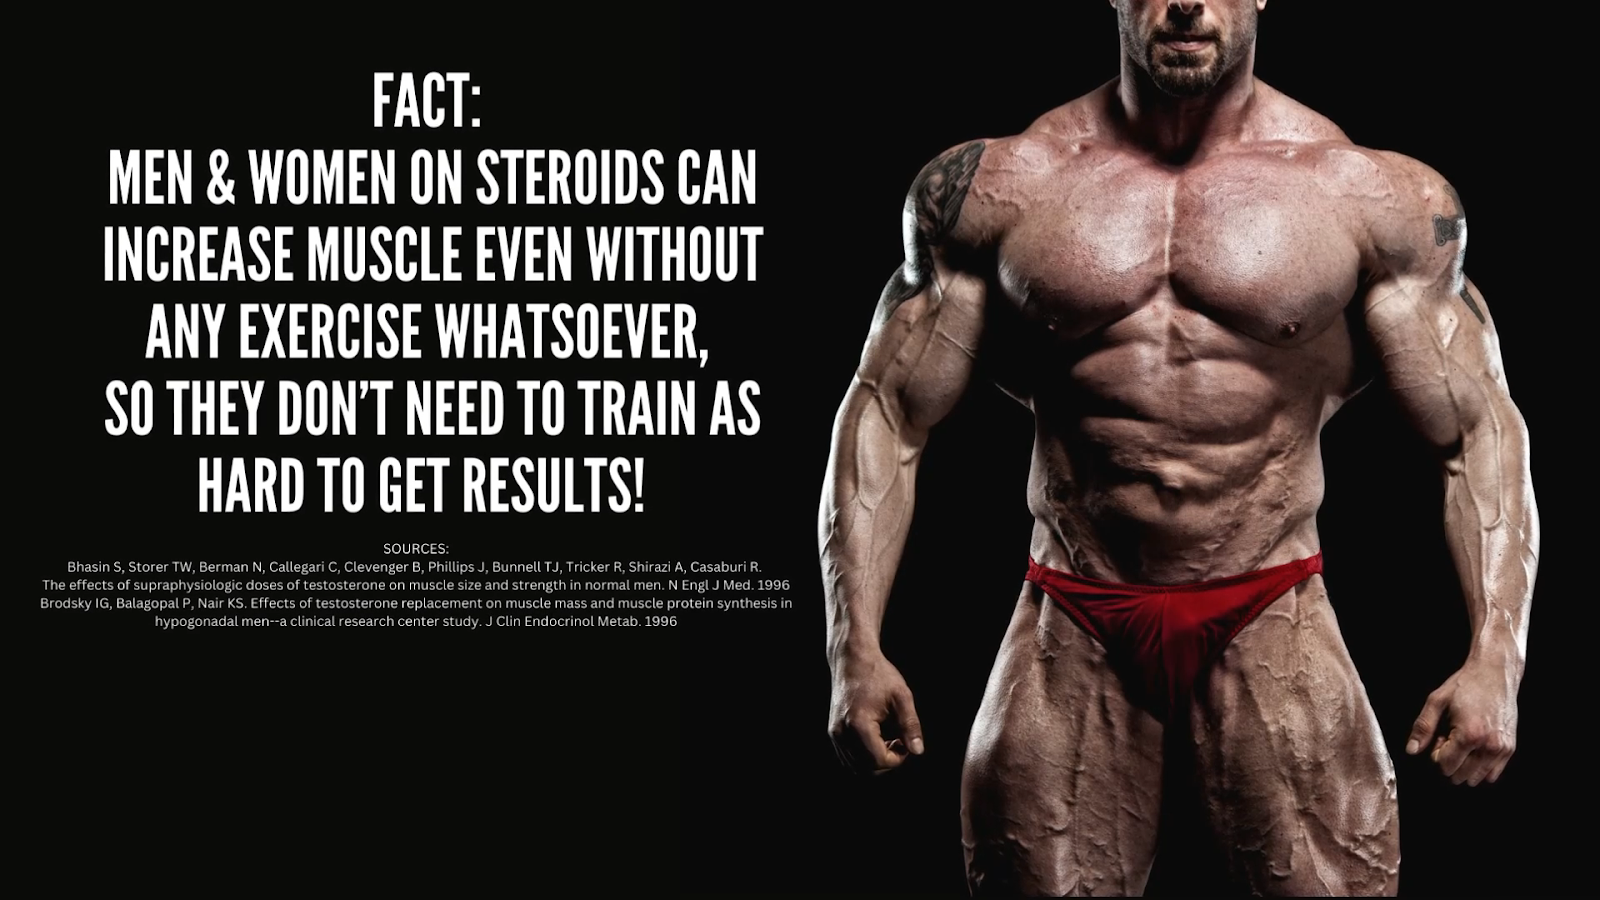 Men and women on steroids can increase muscle mass even with no training 